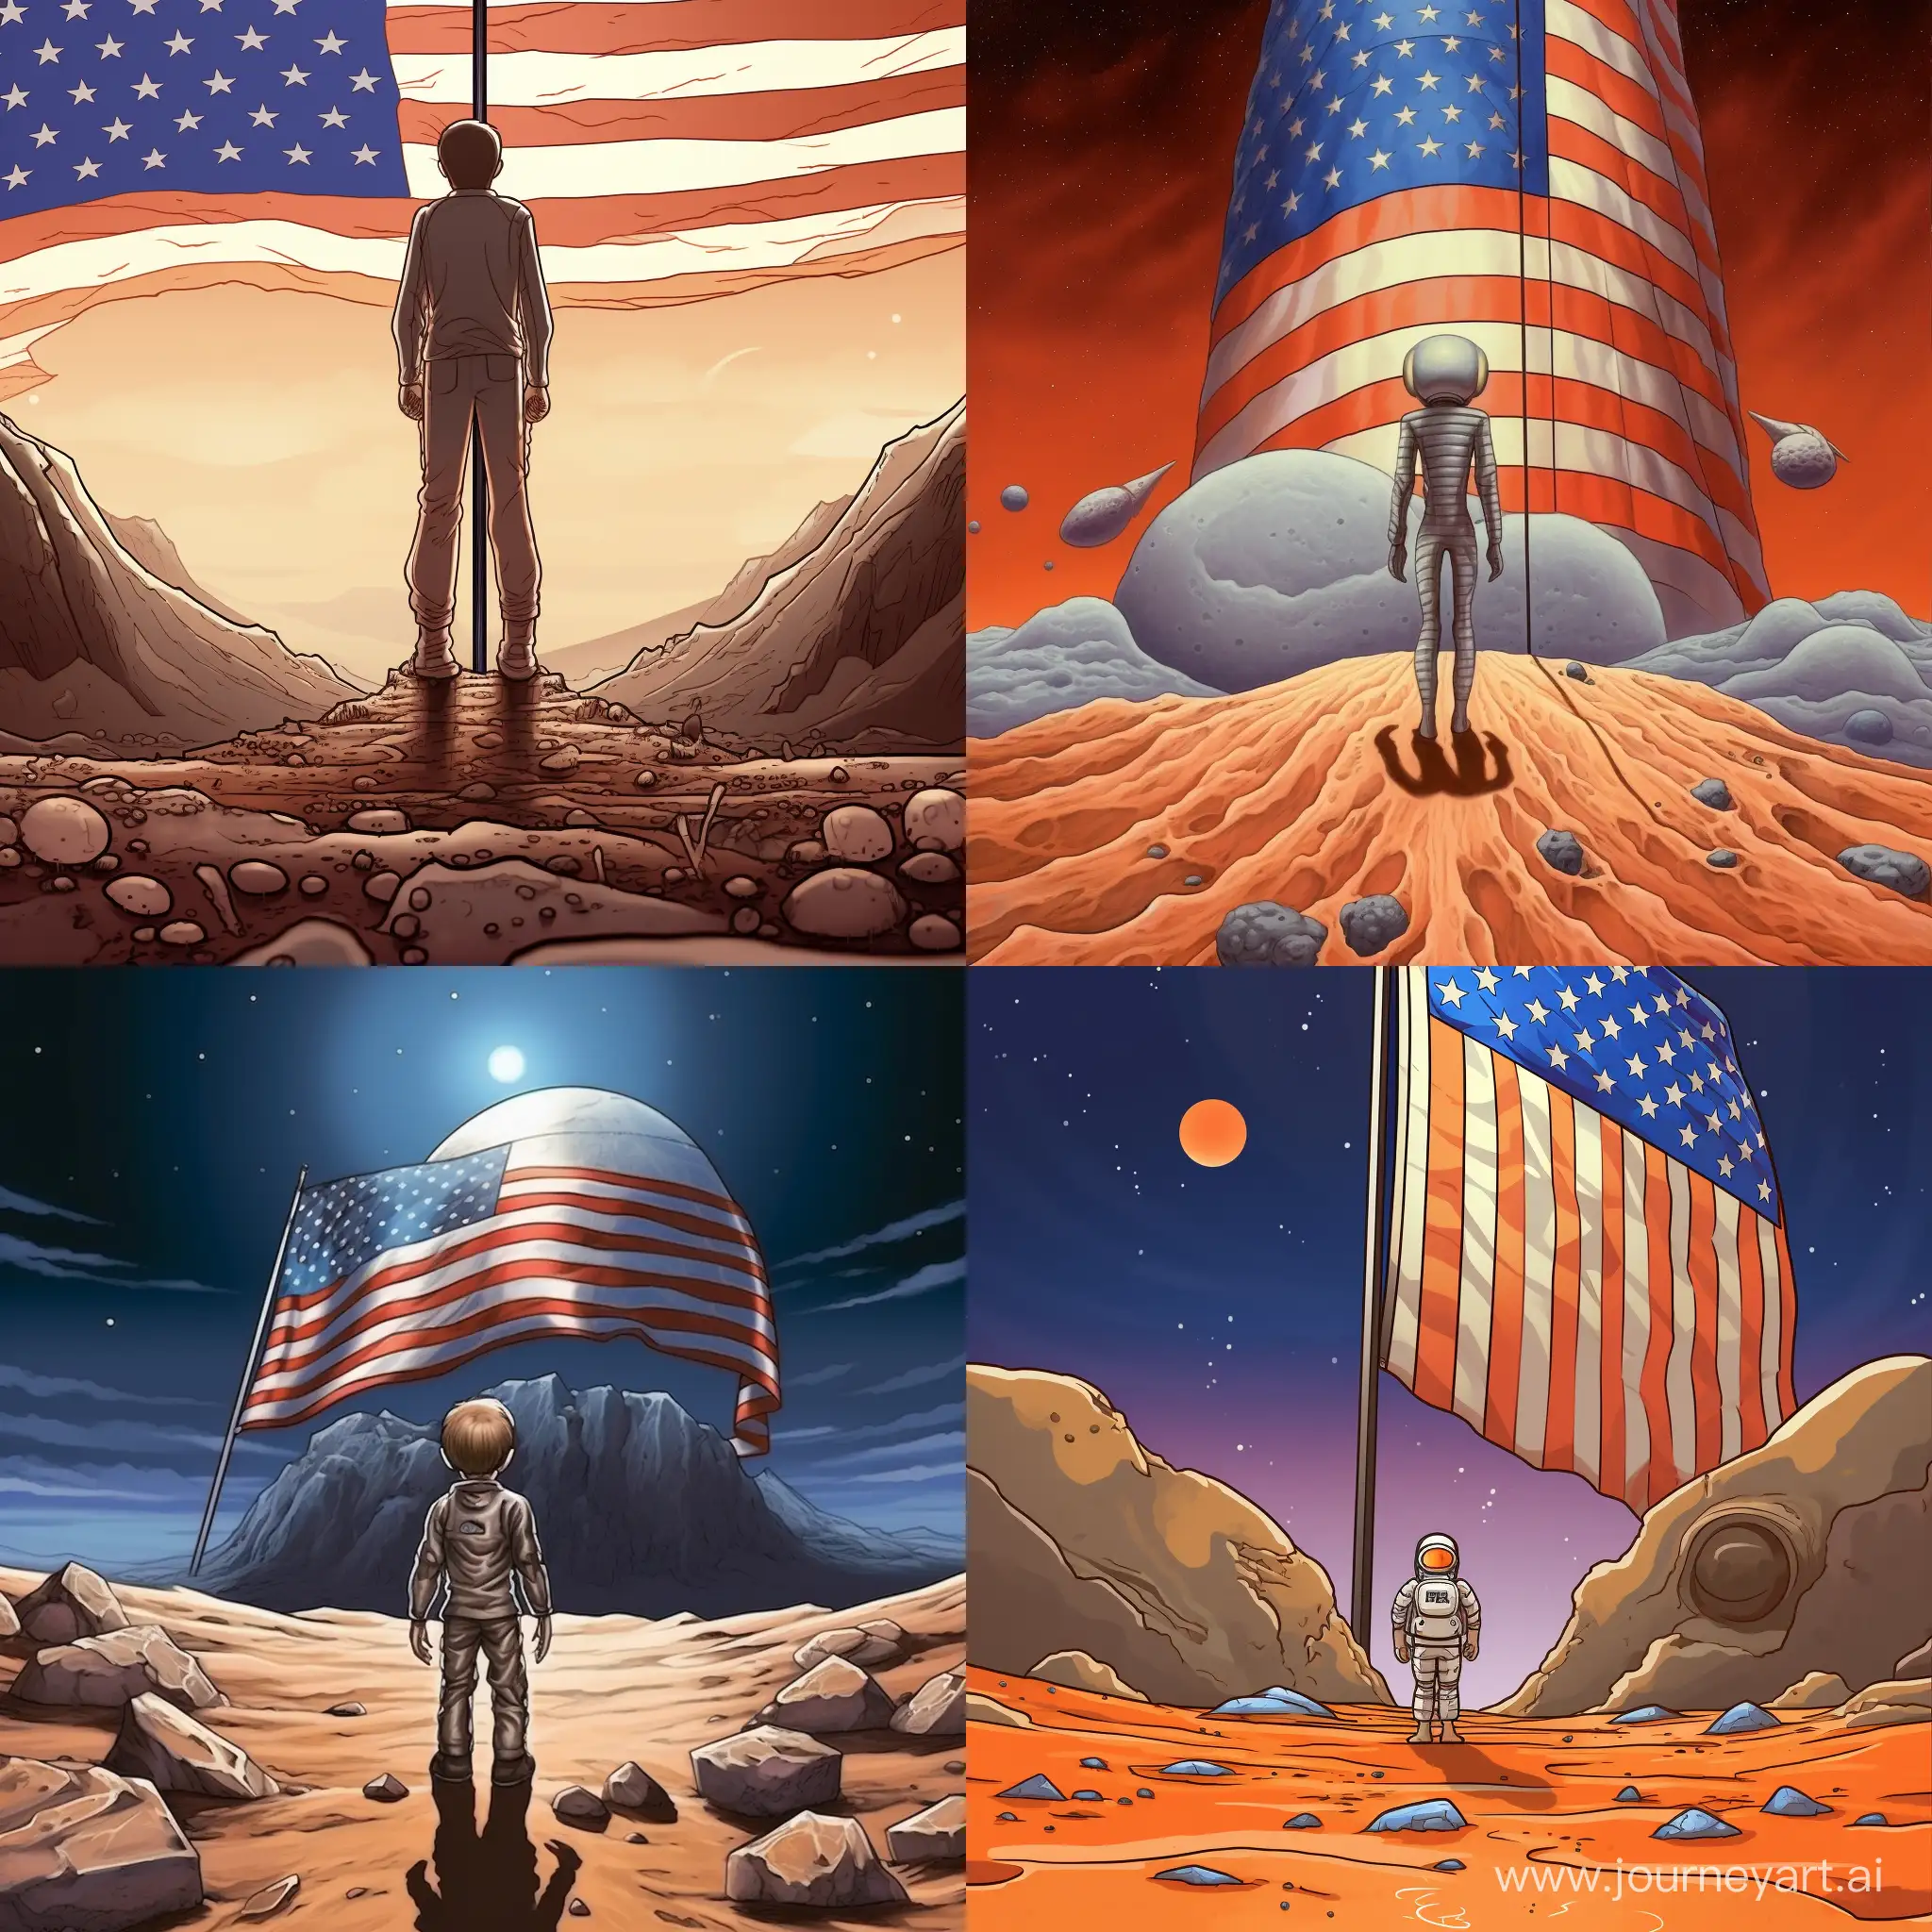 1boy, extraterrestrial monster, standing on the1. 1boy, extraterrestrial monster, standing on the moon, foot stepping on the US flag (1.3), American rover nearby (1.2), Earth in the backdrop (1.5)
Full body shot, close up of monster's foot and flag, dim tones, futuristic setting